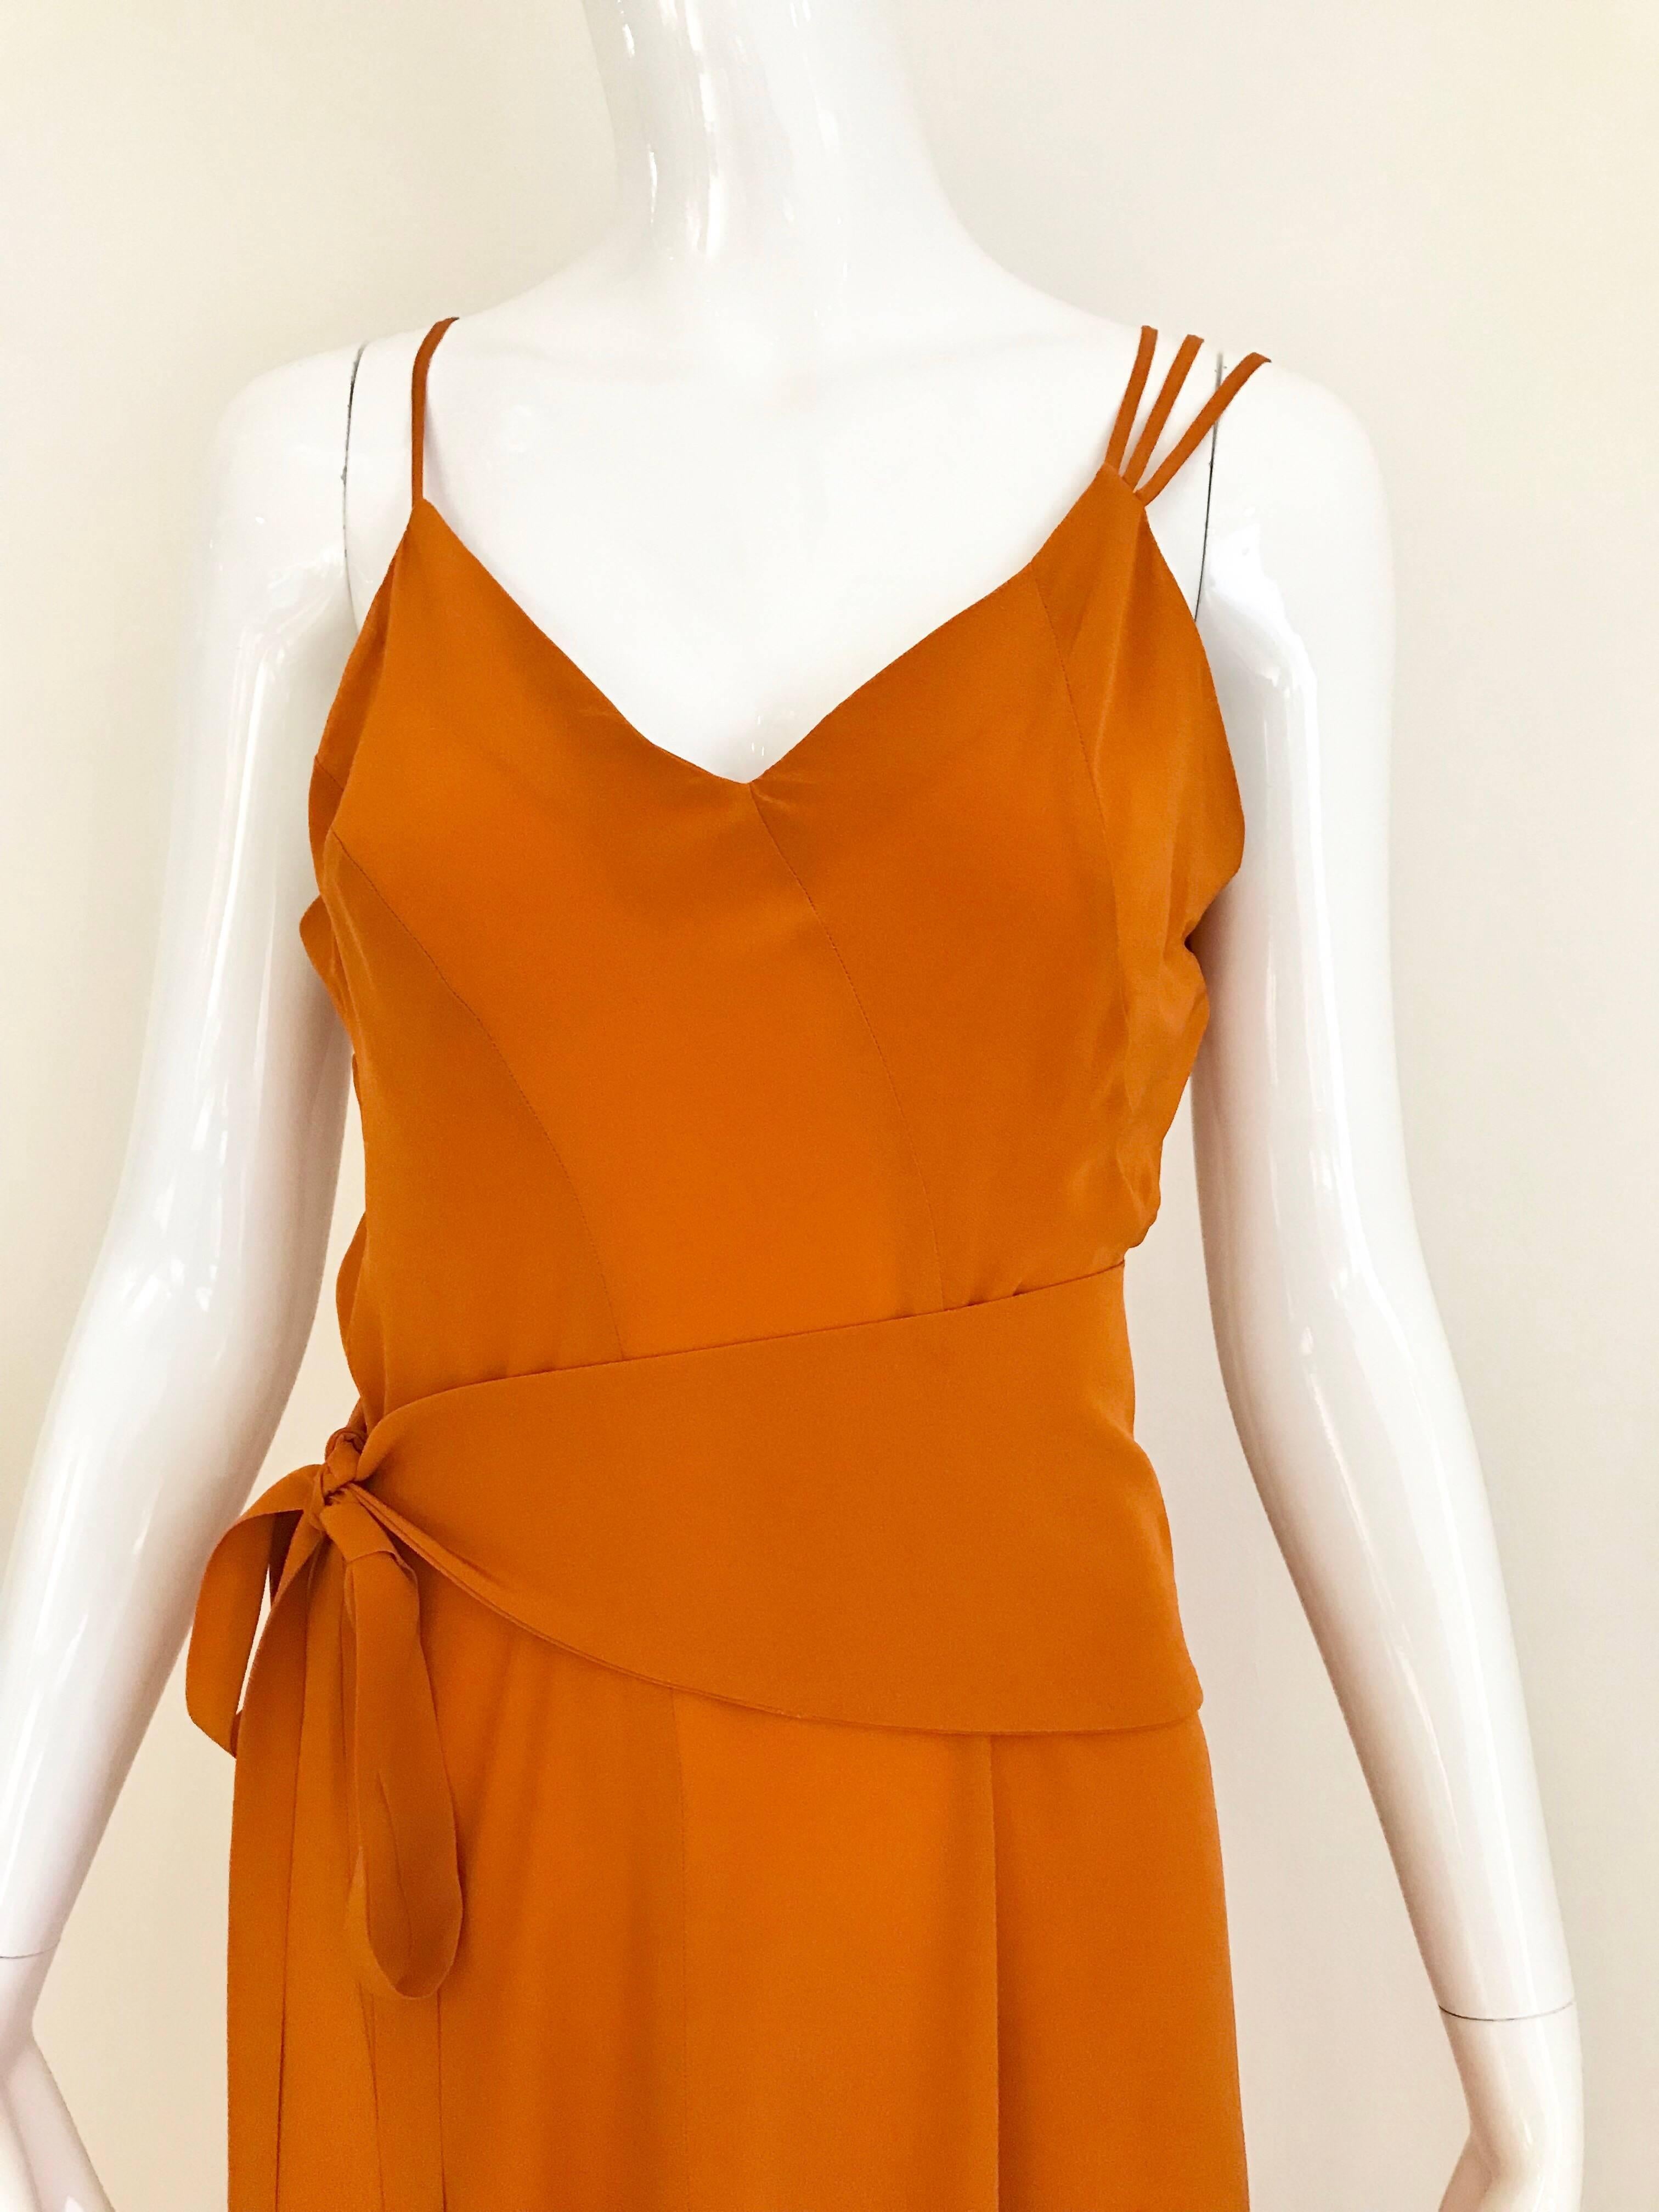 Sexy and elegant 1990s KENZO orange silk dress with silk belt.
Size 4/ Small
**** This Garment has been professionally Dry Cleaned and Ready to wear.
